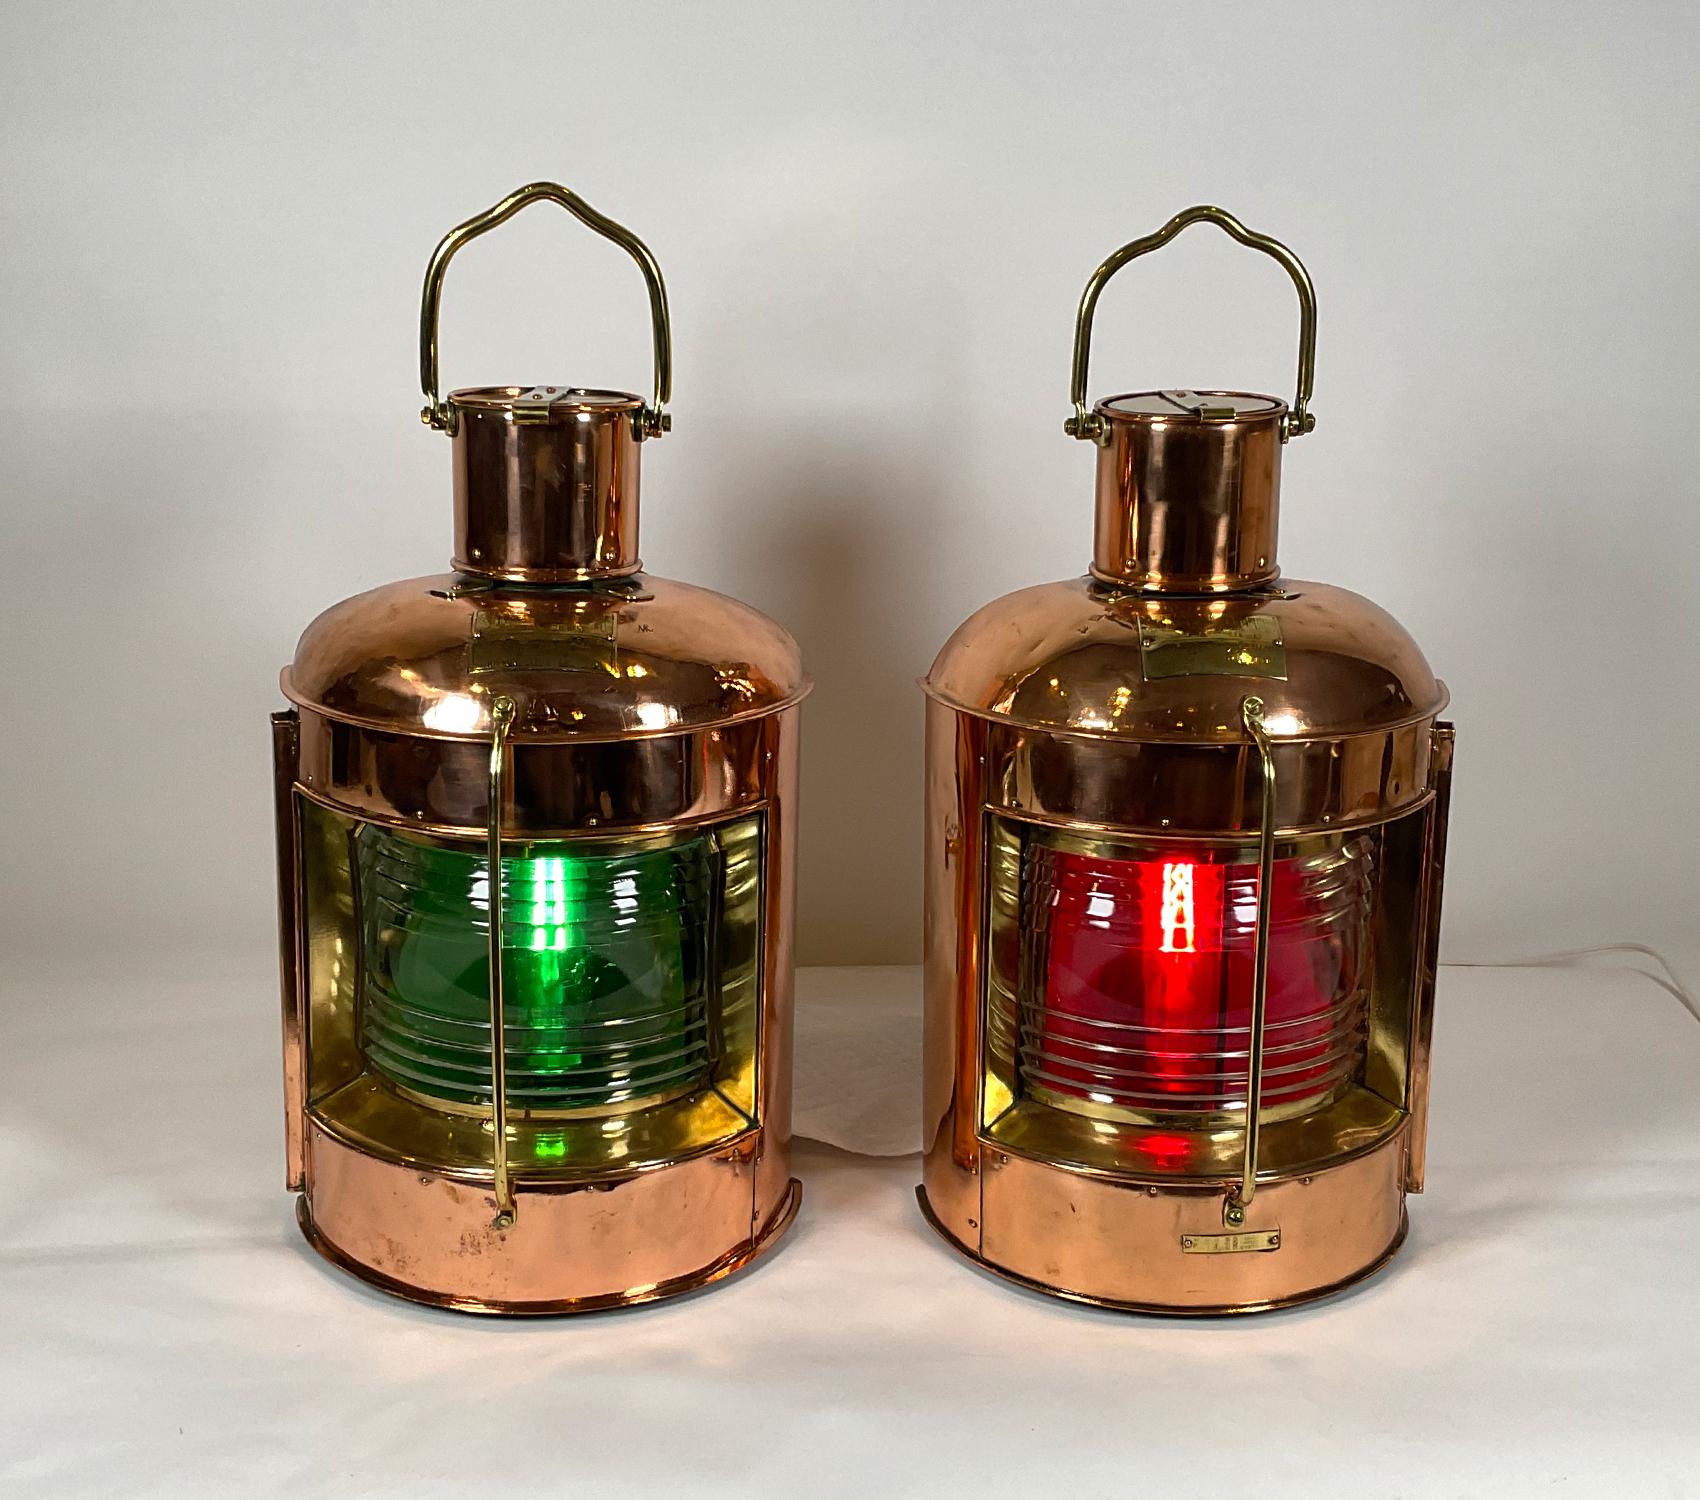 Pair of highly polished copper and brass ship’s lanterns. The polished and lacquered copper cases have brass bezels around the lenses, protective brass bars, handles, badges, etc. Fresnel glass lenses, red and green filters. Good strong pair of